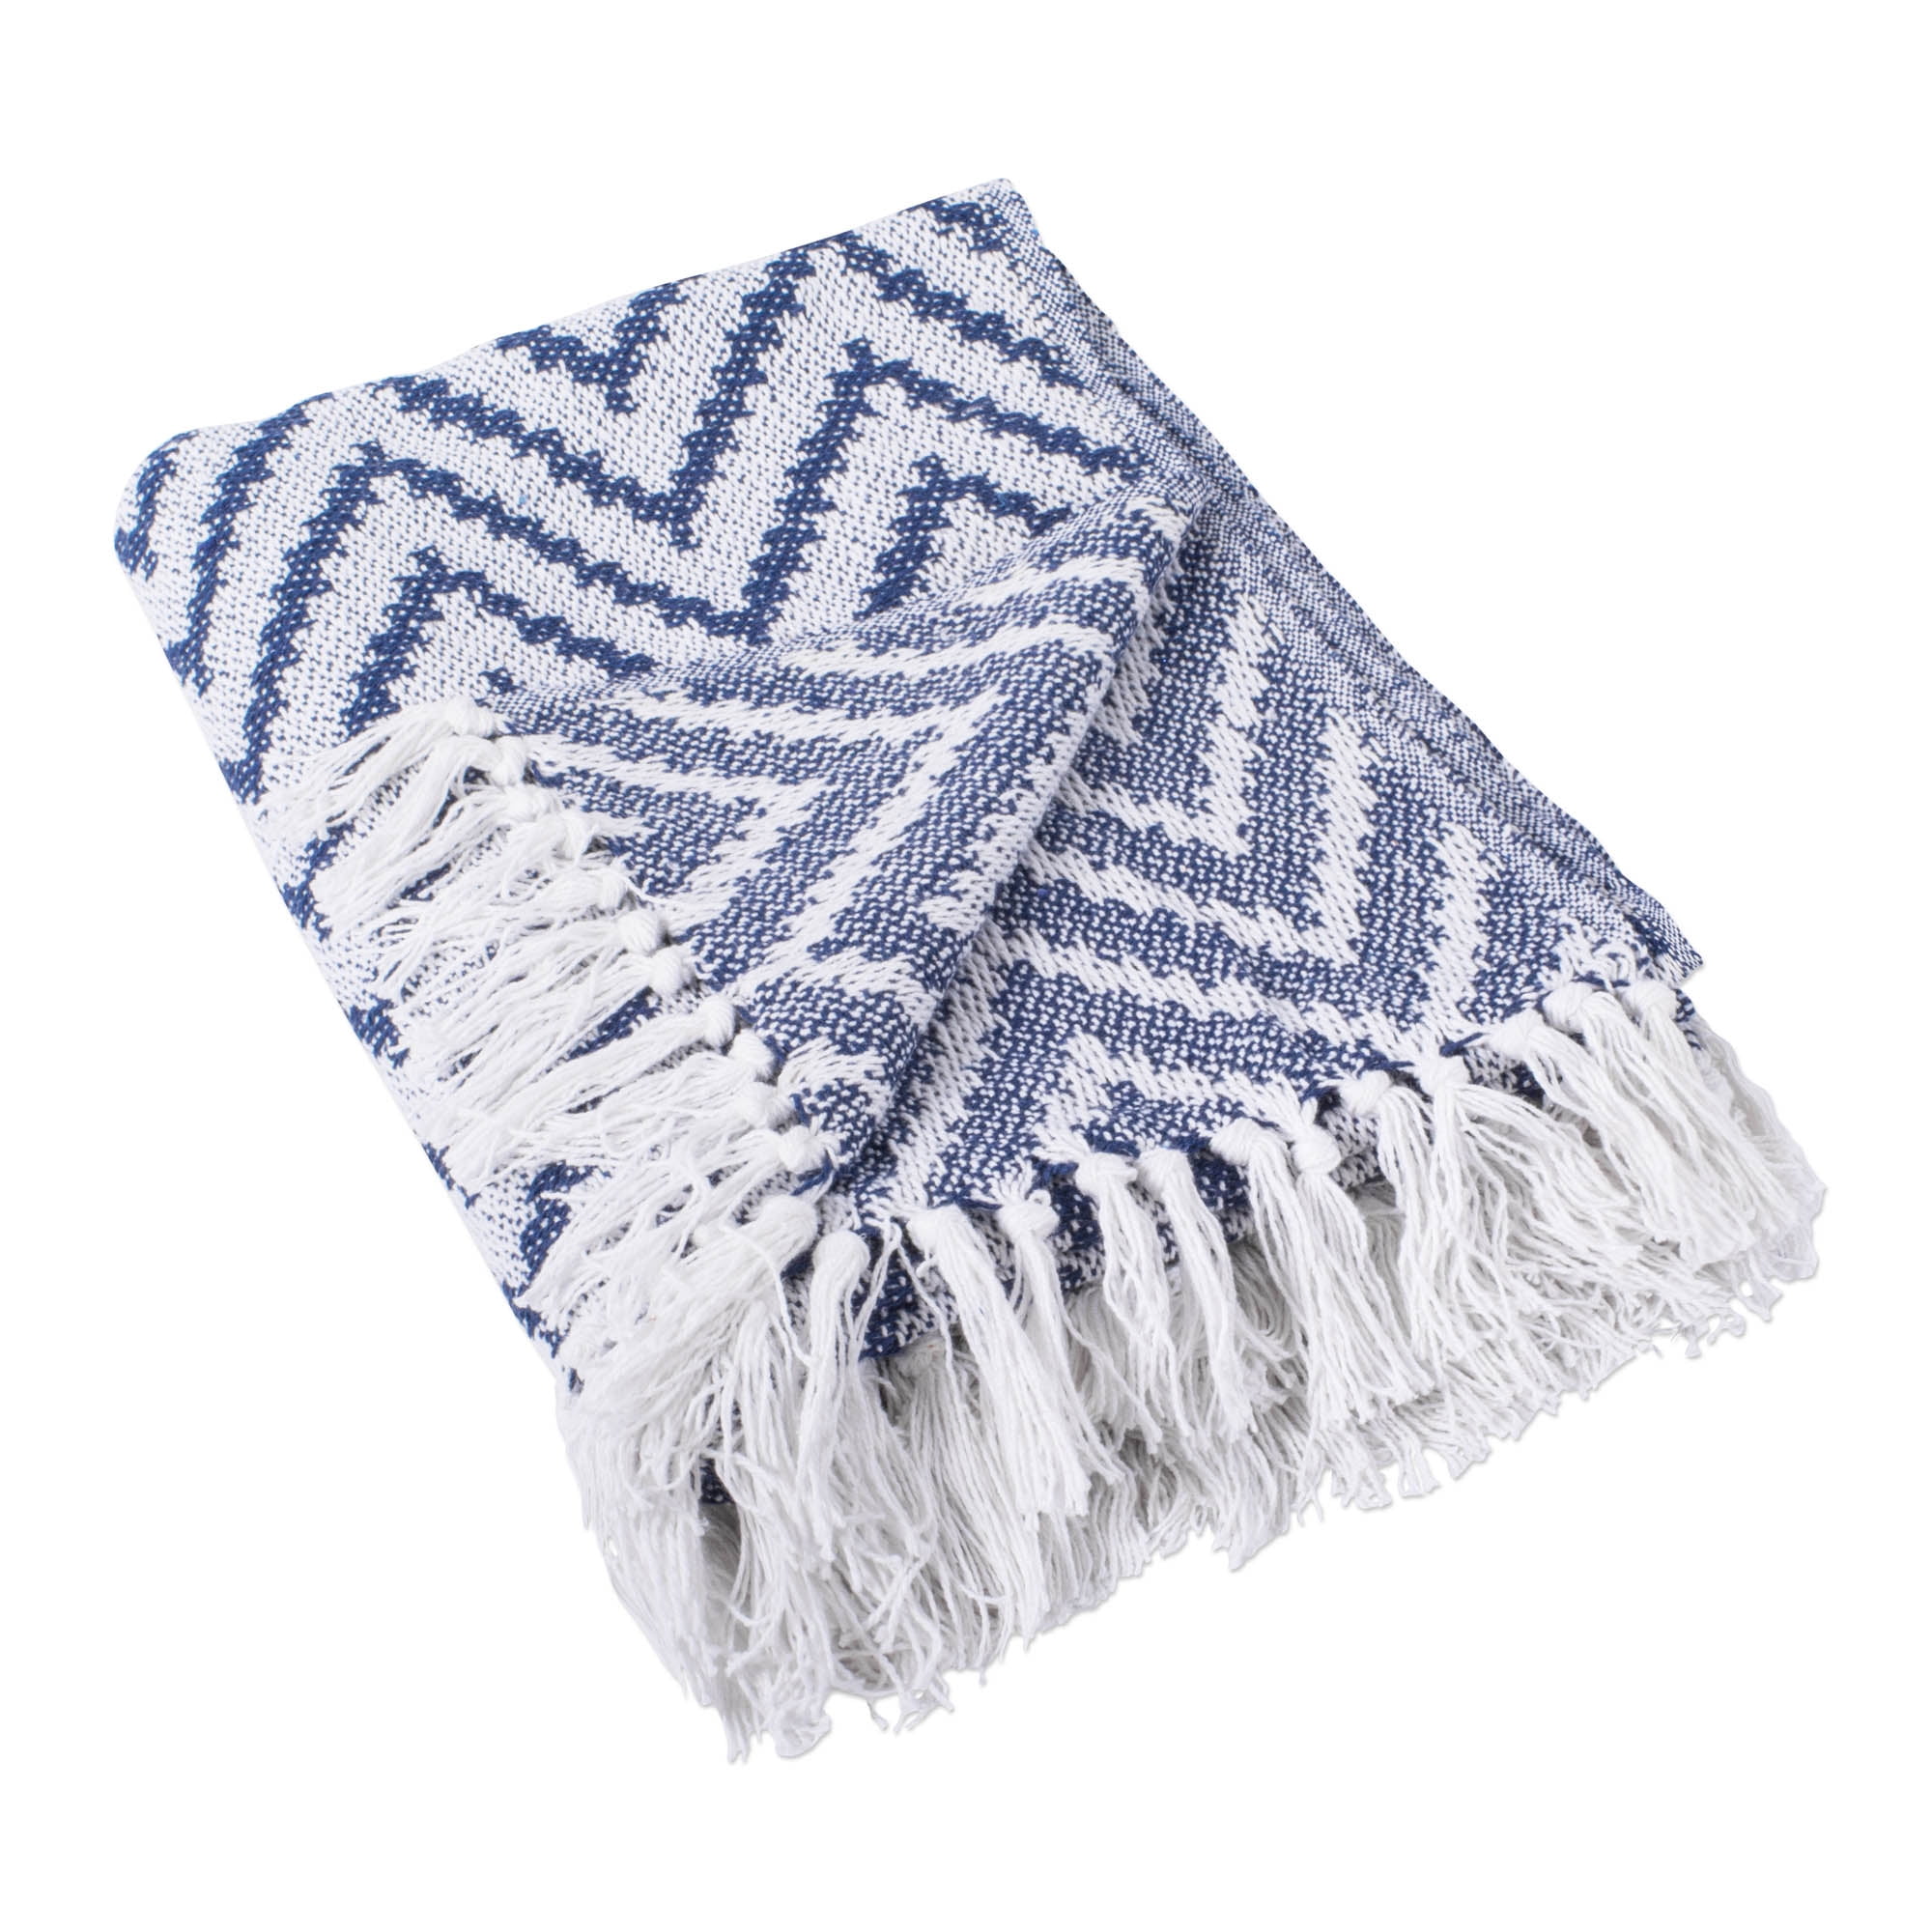 Design Imports CAMZ37995 Nautical Blue Large Chevron Blanket Throw From Midwest Design Imports IBT Shop